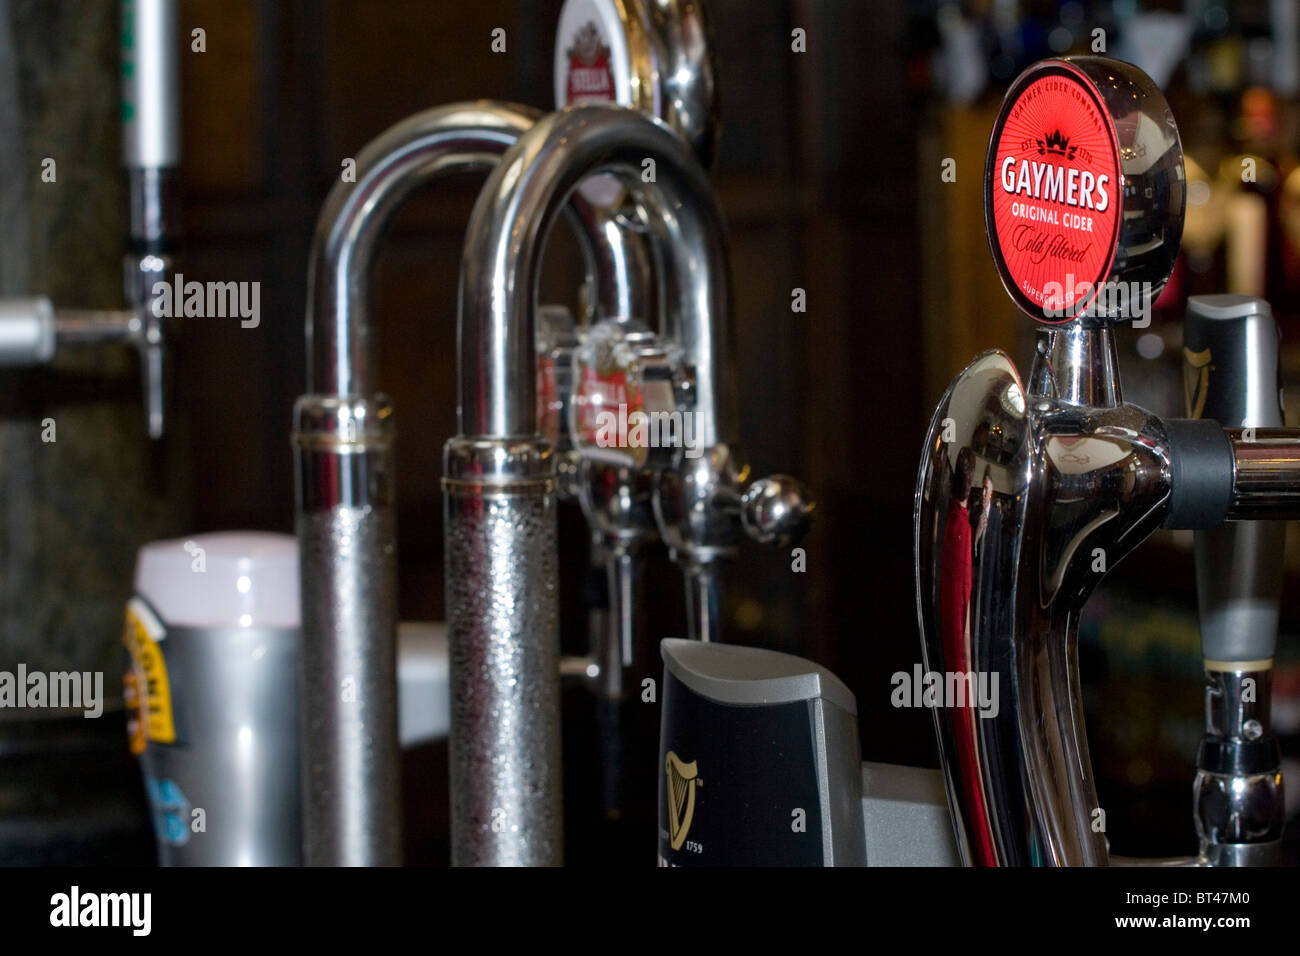 The pumps at a bar in the UK showing a range of alcoholic beverages from cider, lager and bitter. Stock Photo